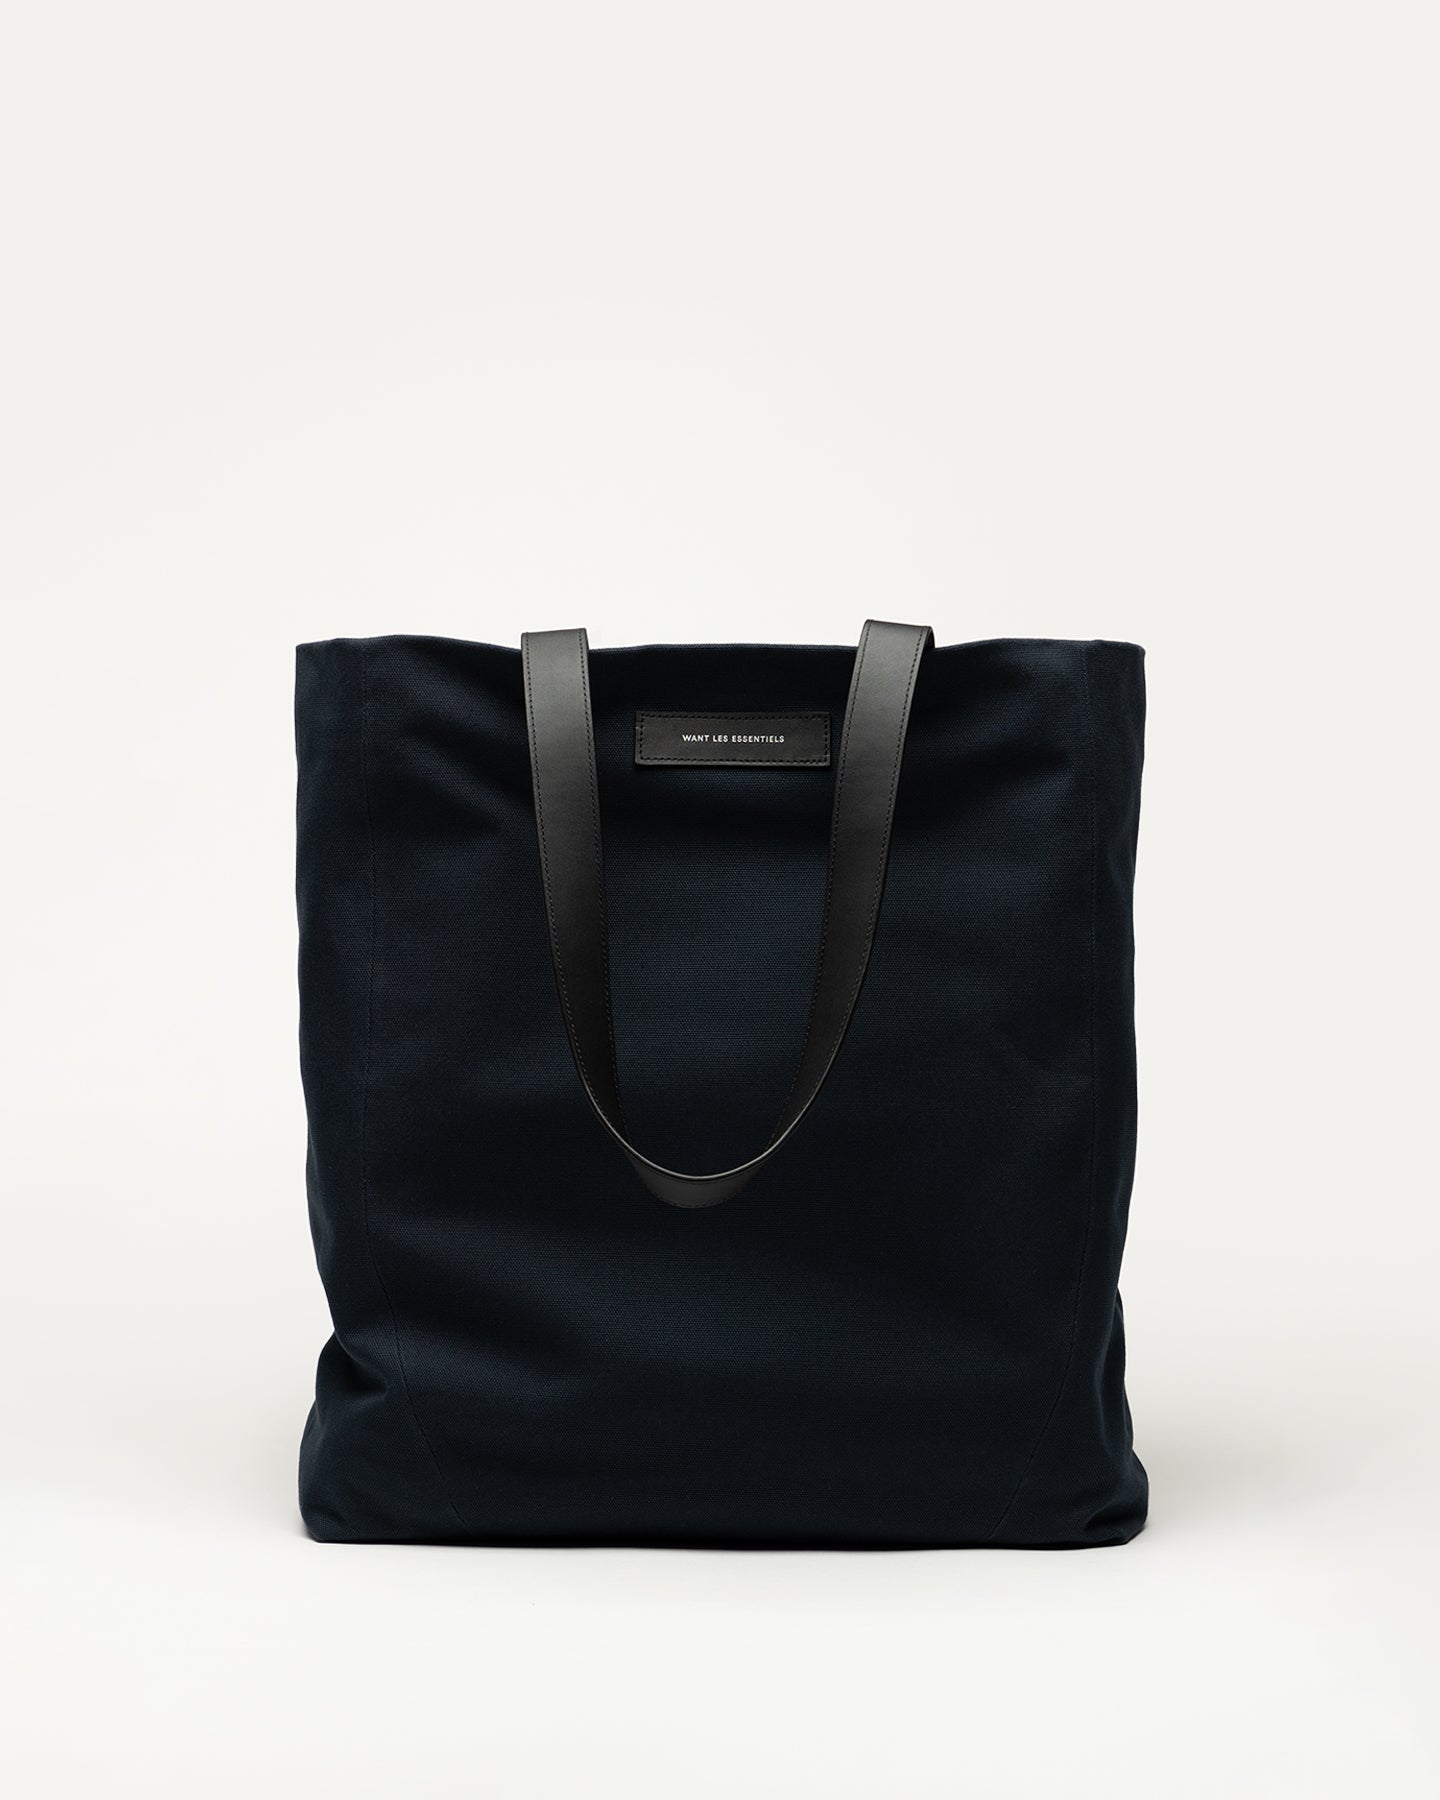 Tote Bags for Women | Tote Purses | WANT Les Essentiels